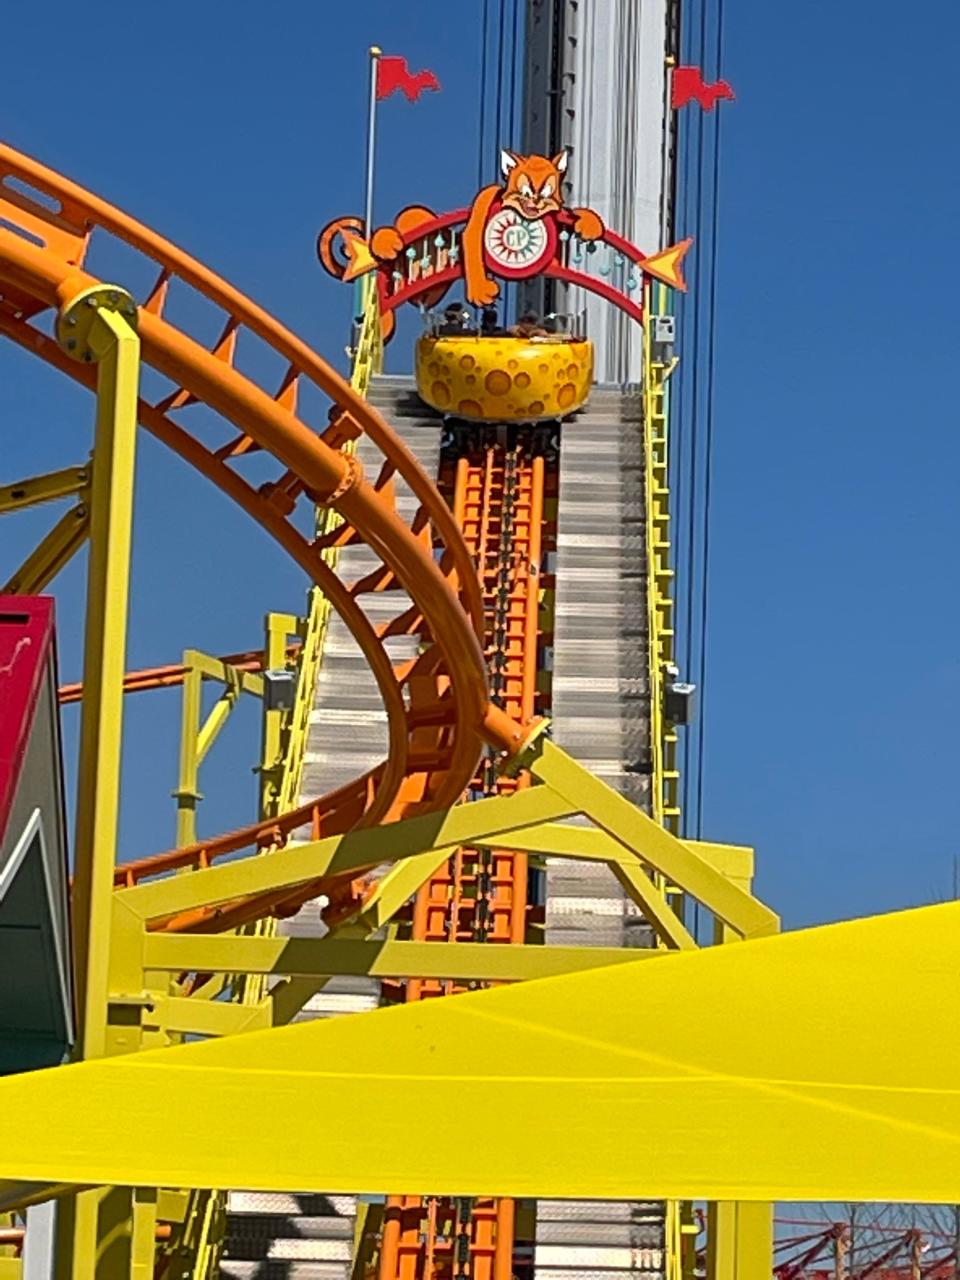 Cedar Point's new Wild Mouse coaster proves temperamental and leaves